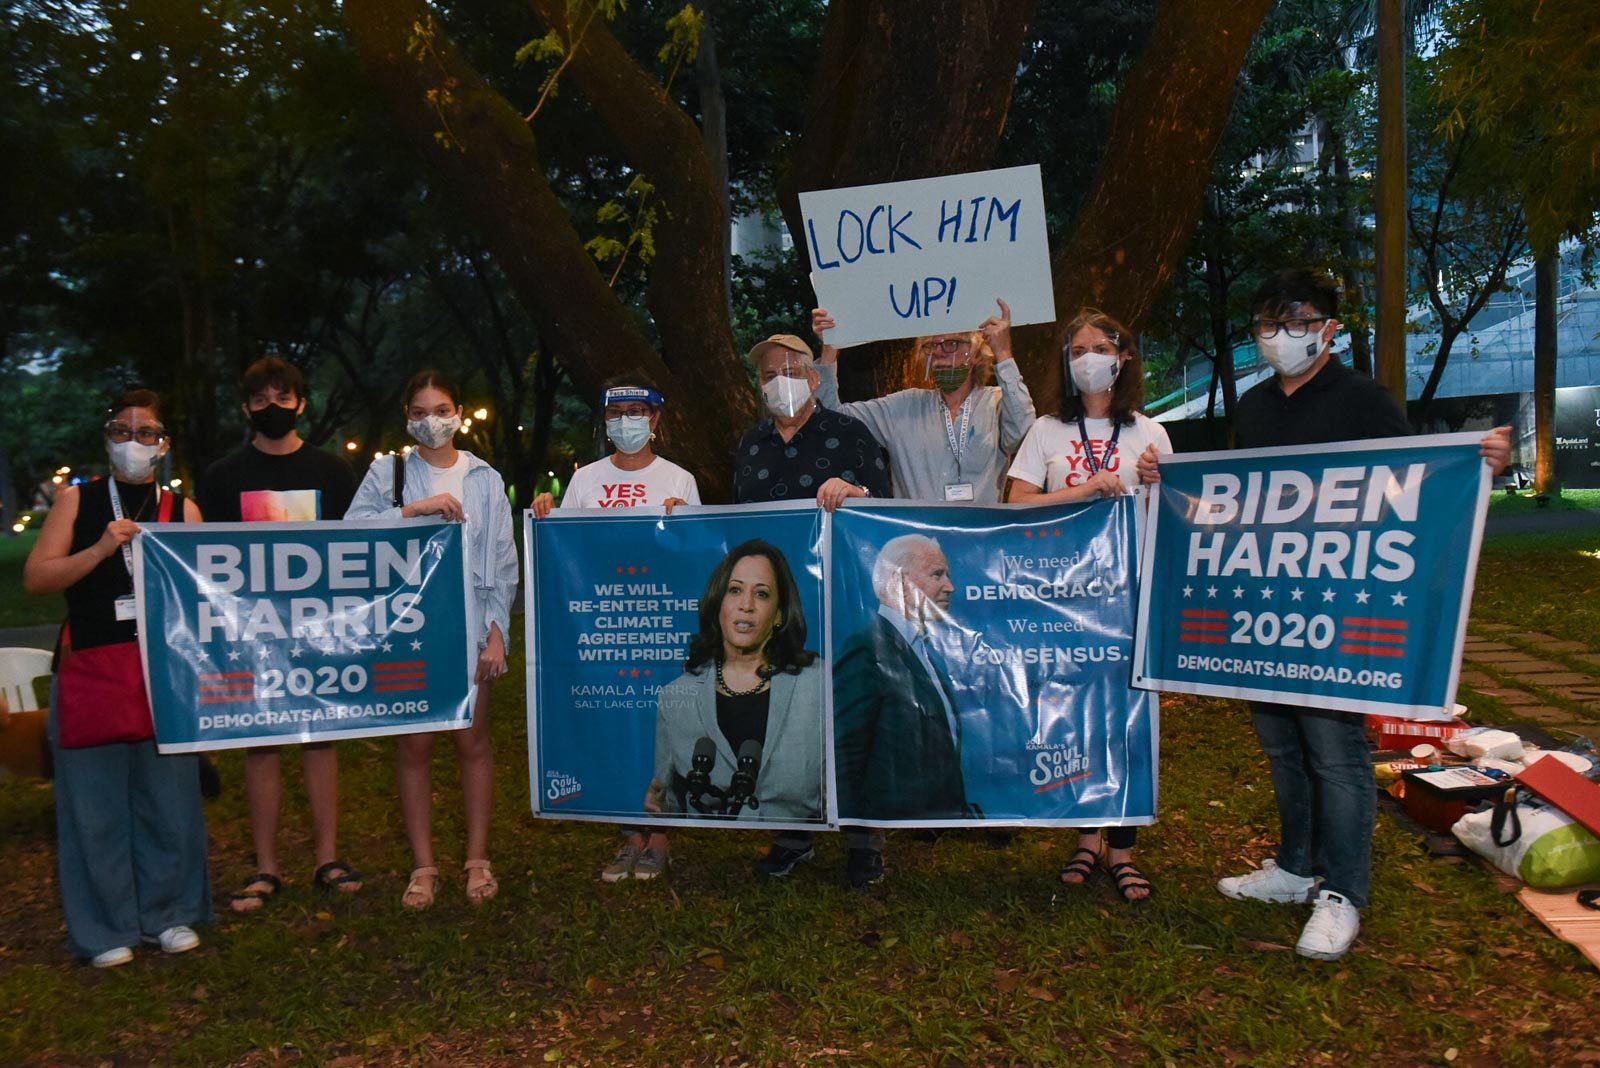 Democrats in PH anxiously monitoring Biden’s path to victory